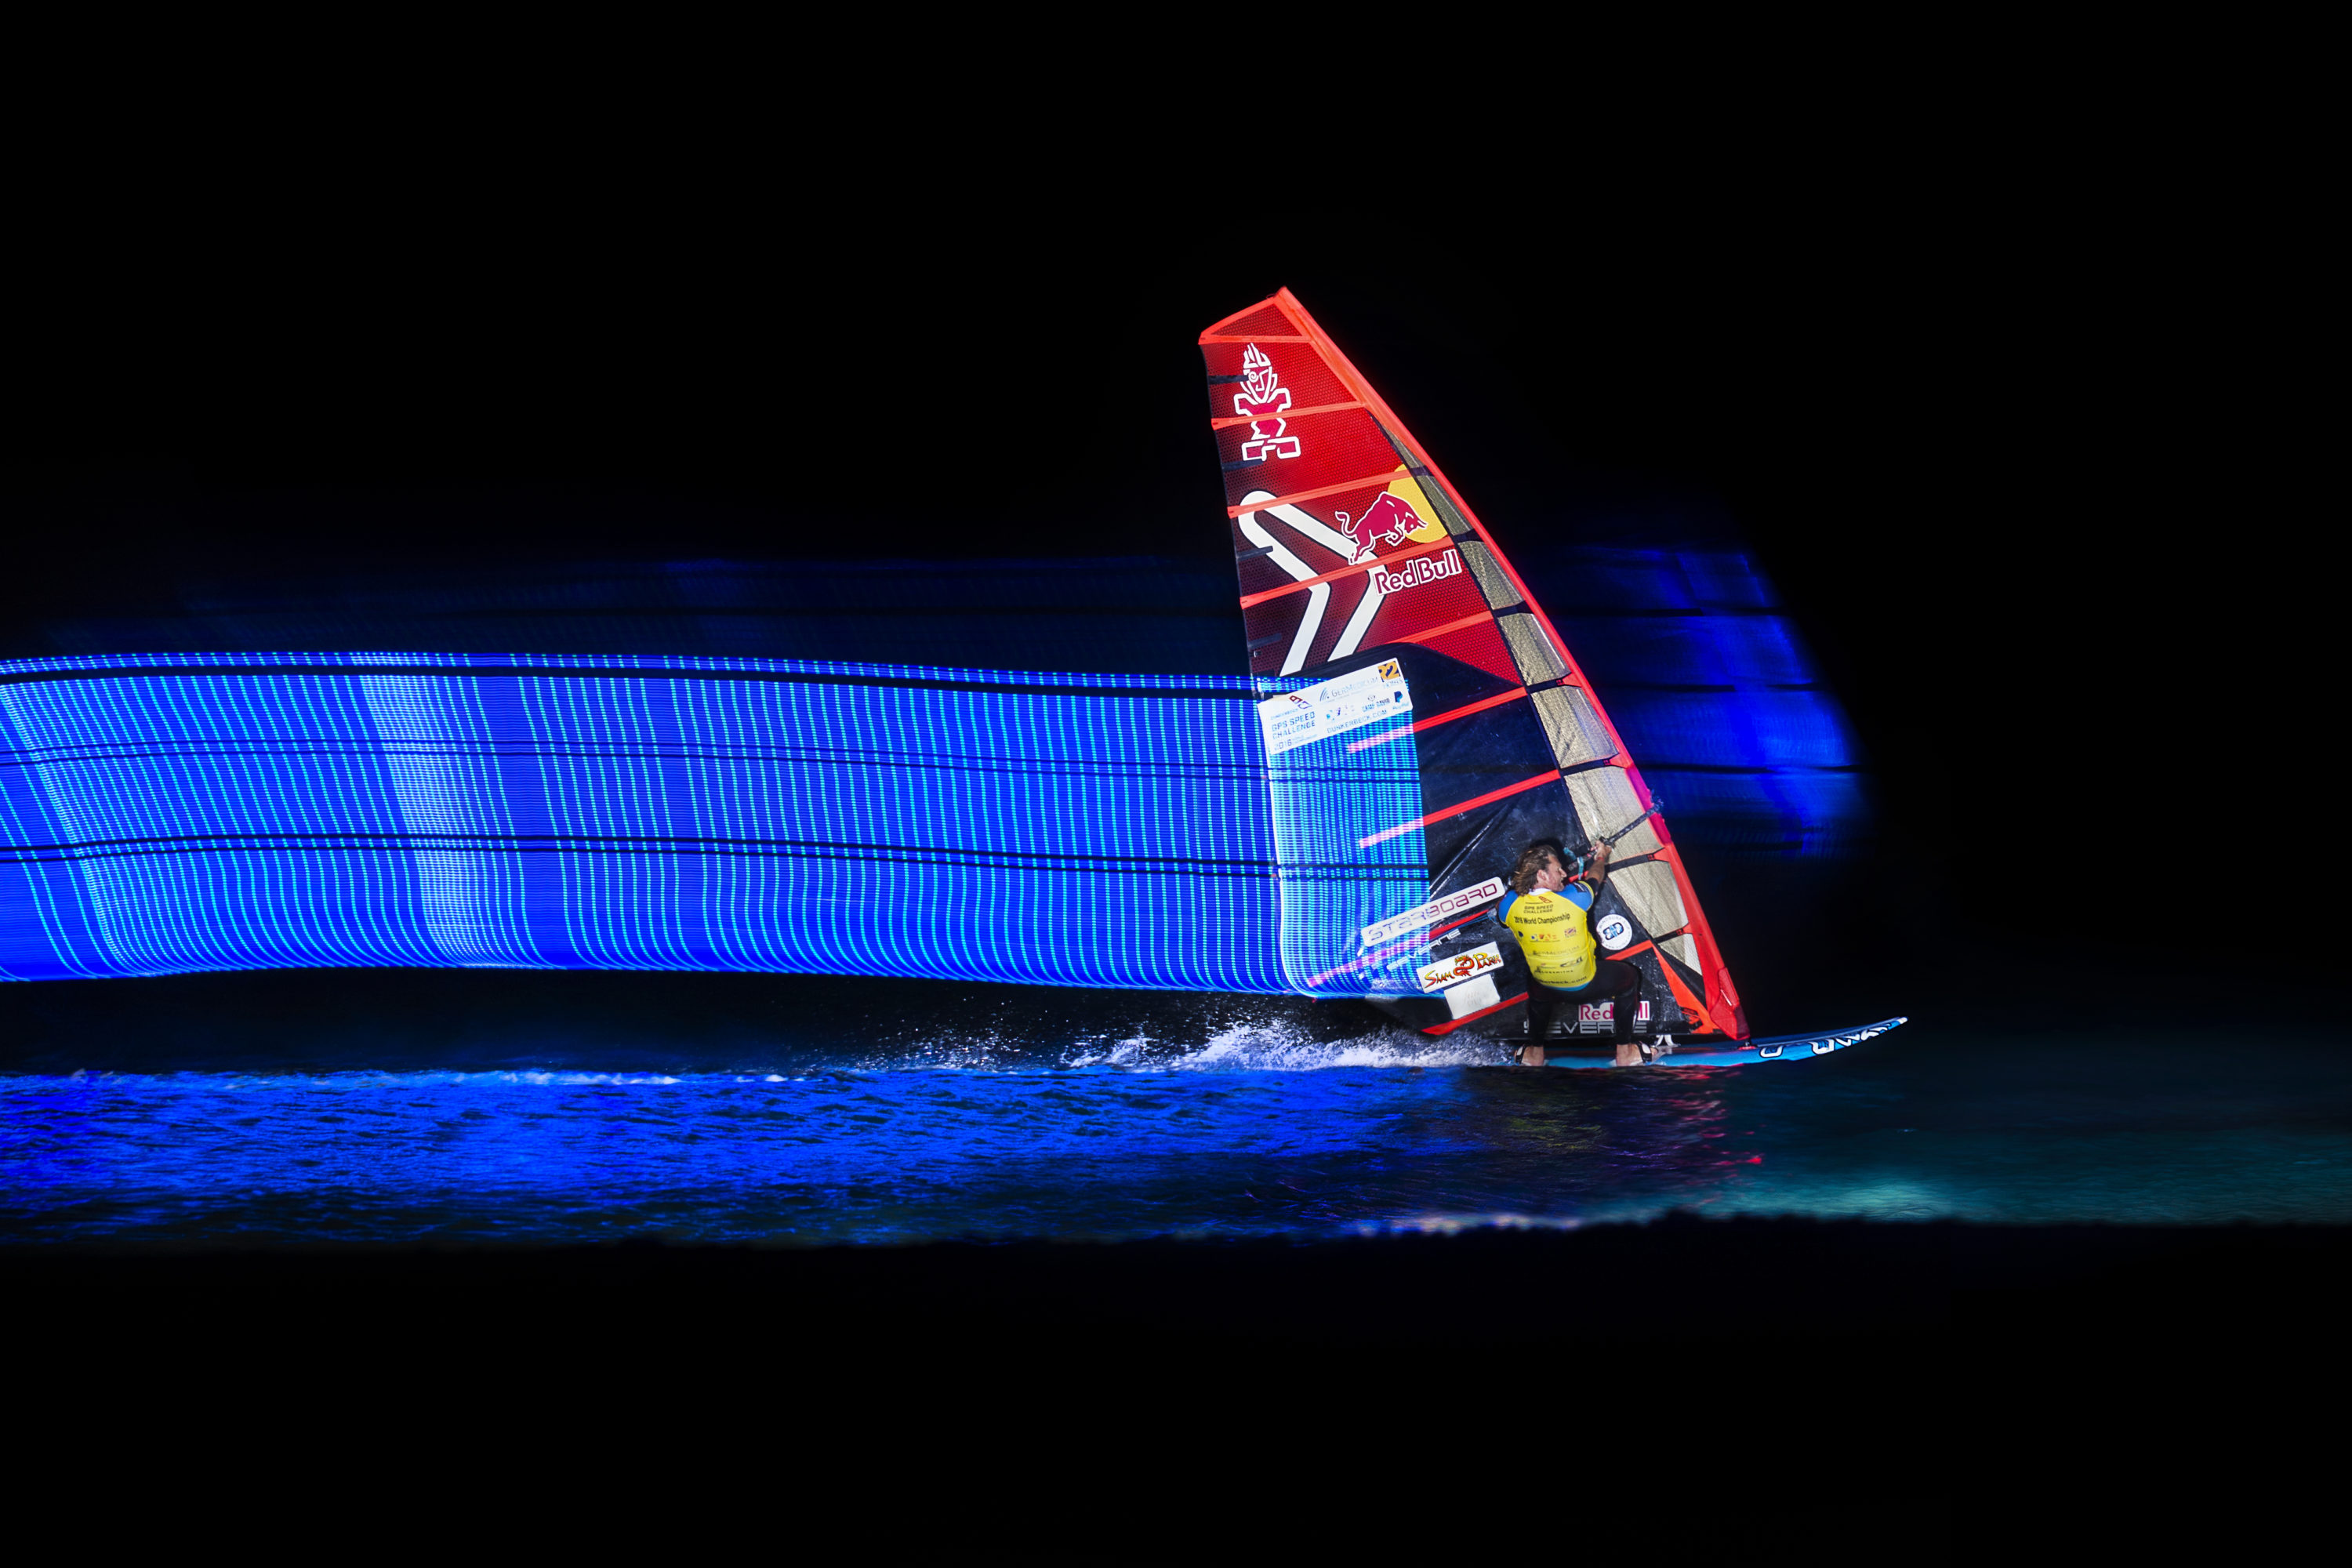 How a Red Bull Photographer Got This Perfect Shot Under Pressure